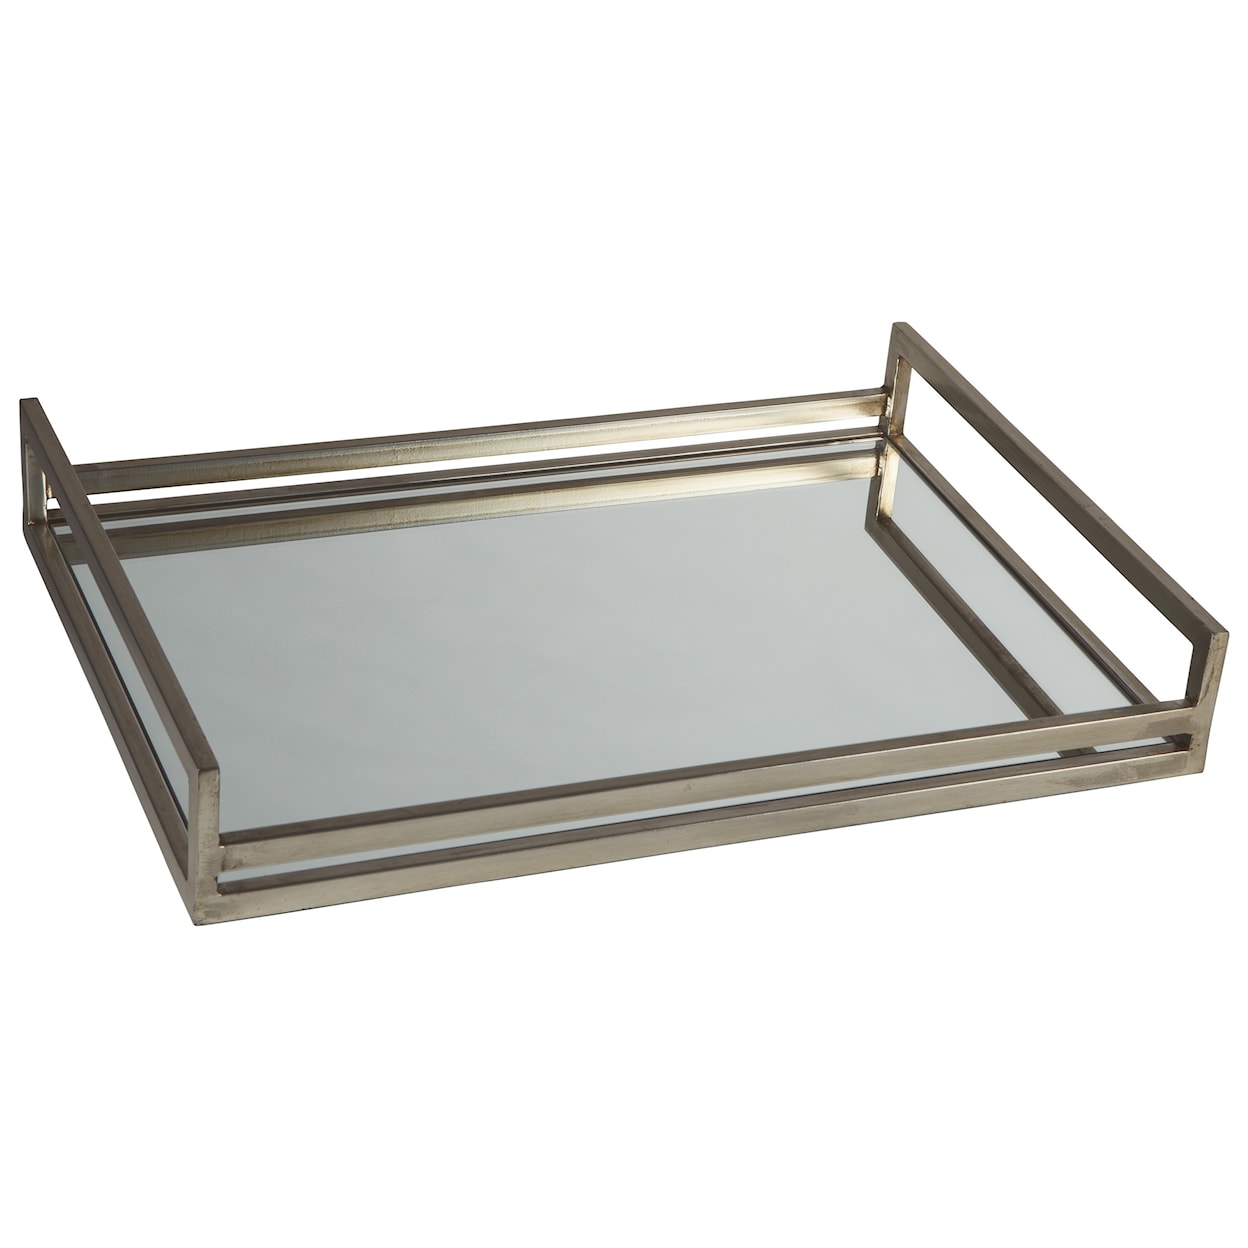 Michael Alan Select Accents Derex Silver Finish Tray